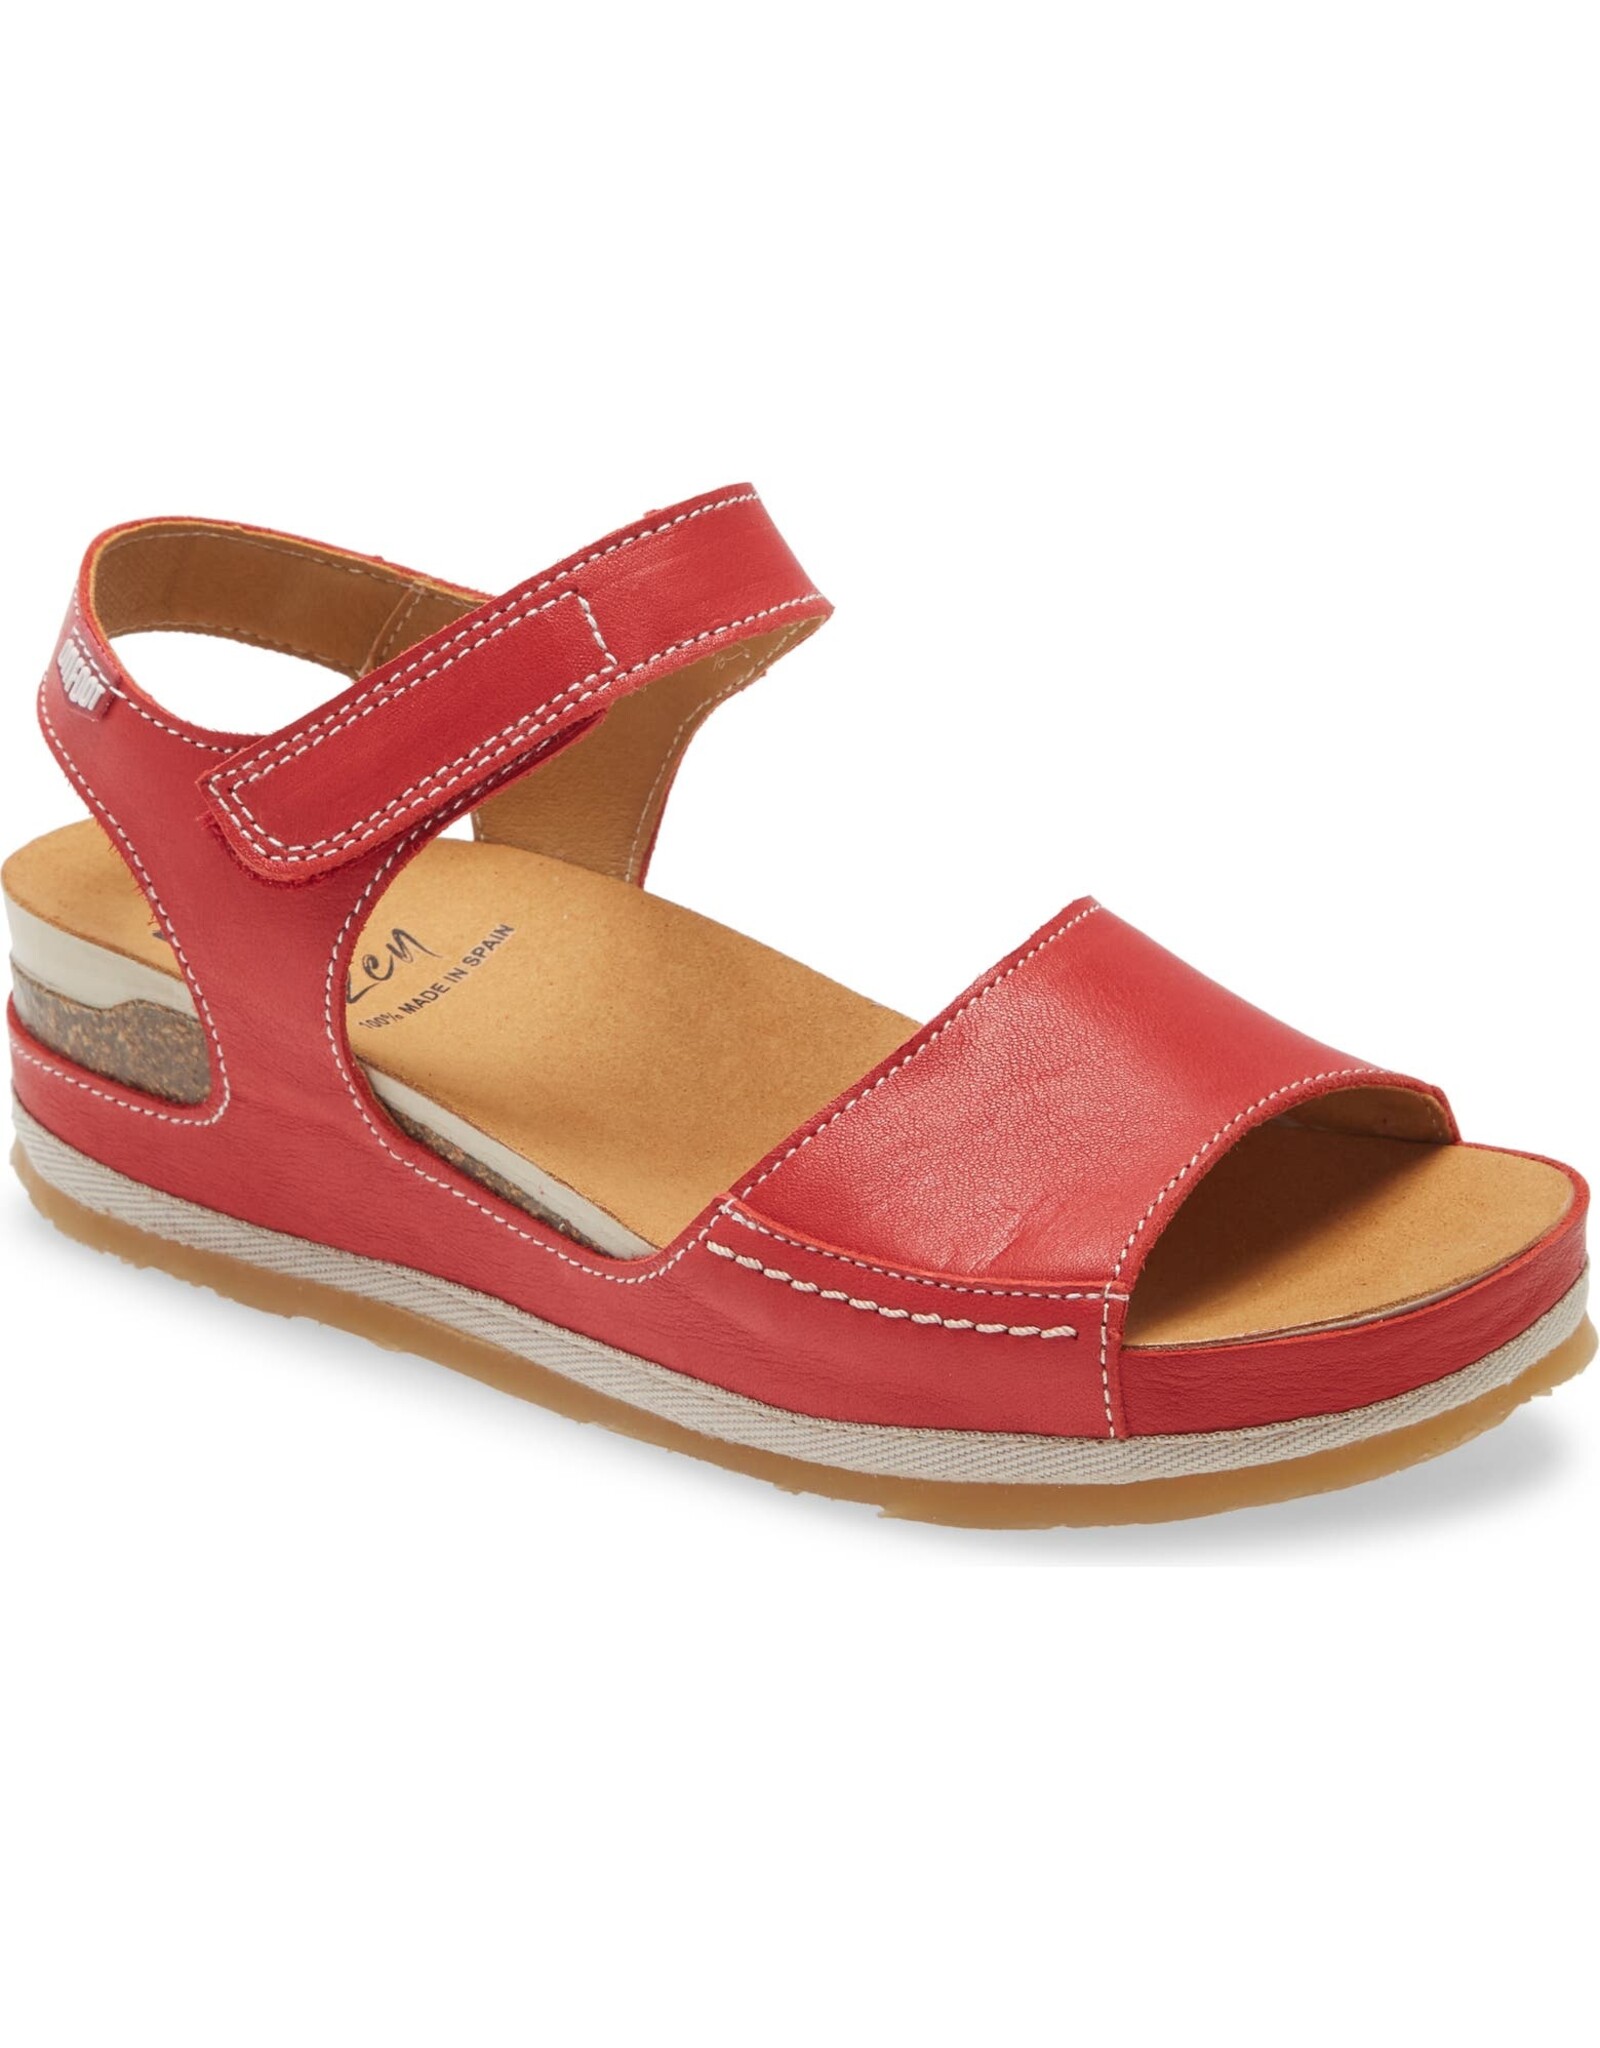 ONFOOT WOMEN'S TUCSON-RED